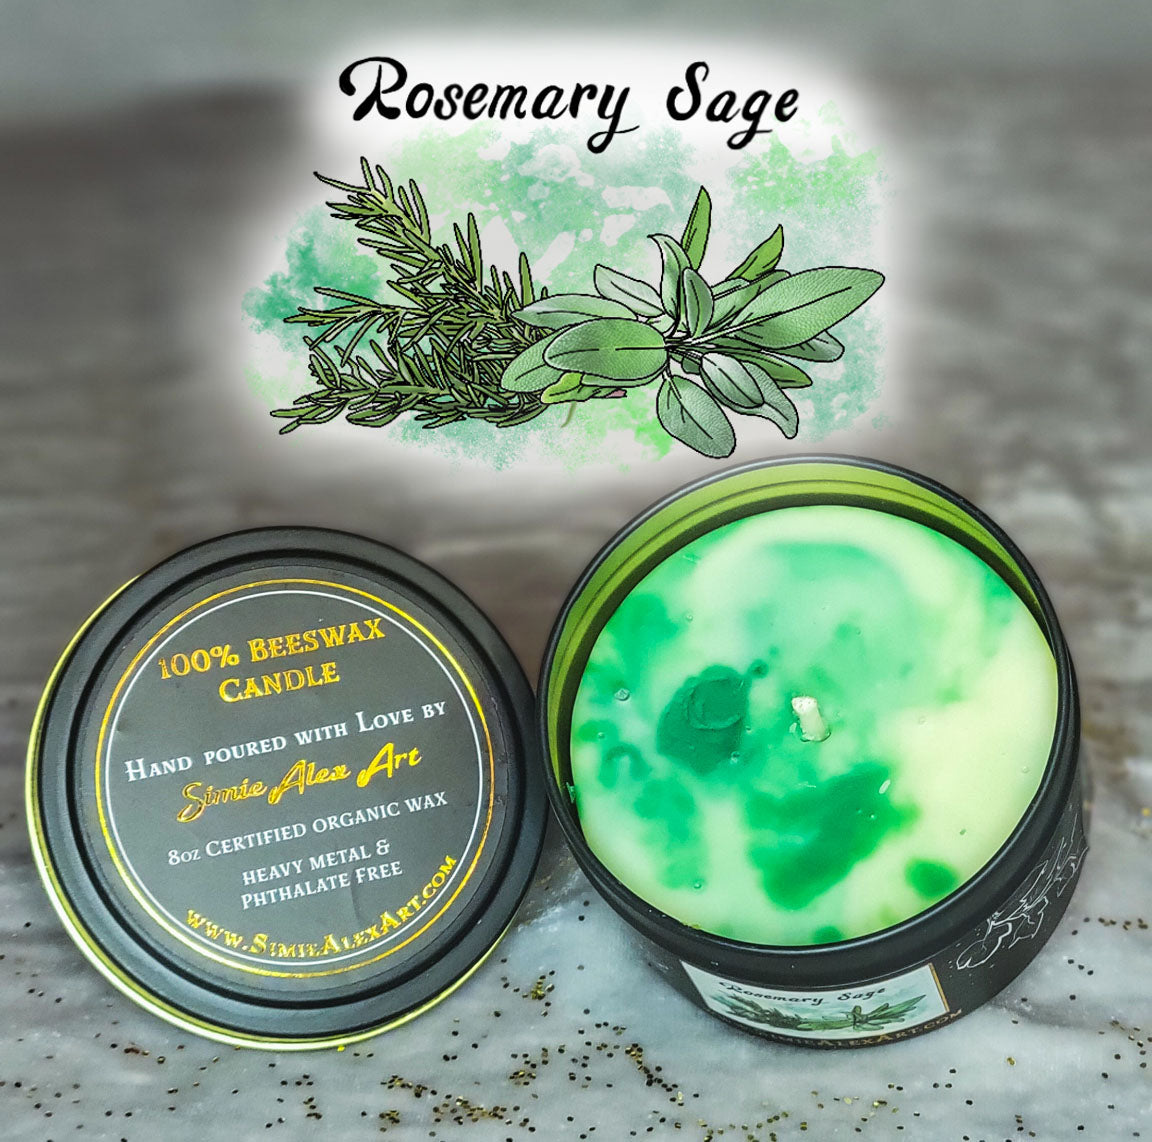 Rosemary Sage Beeswax Candle